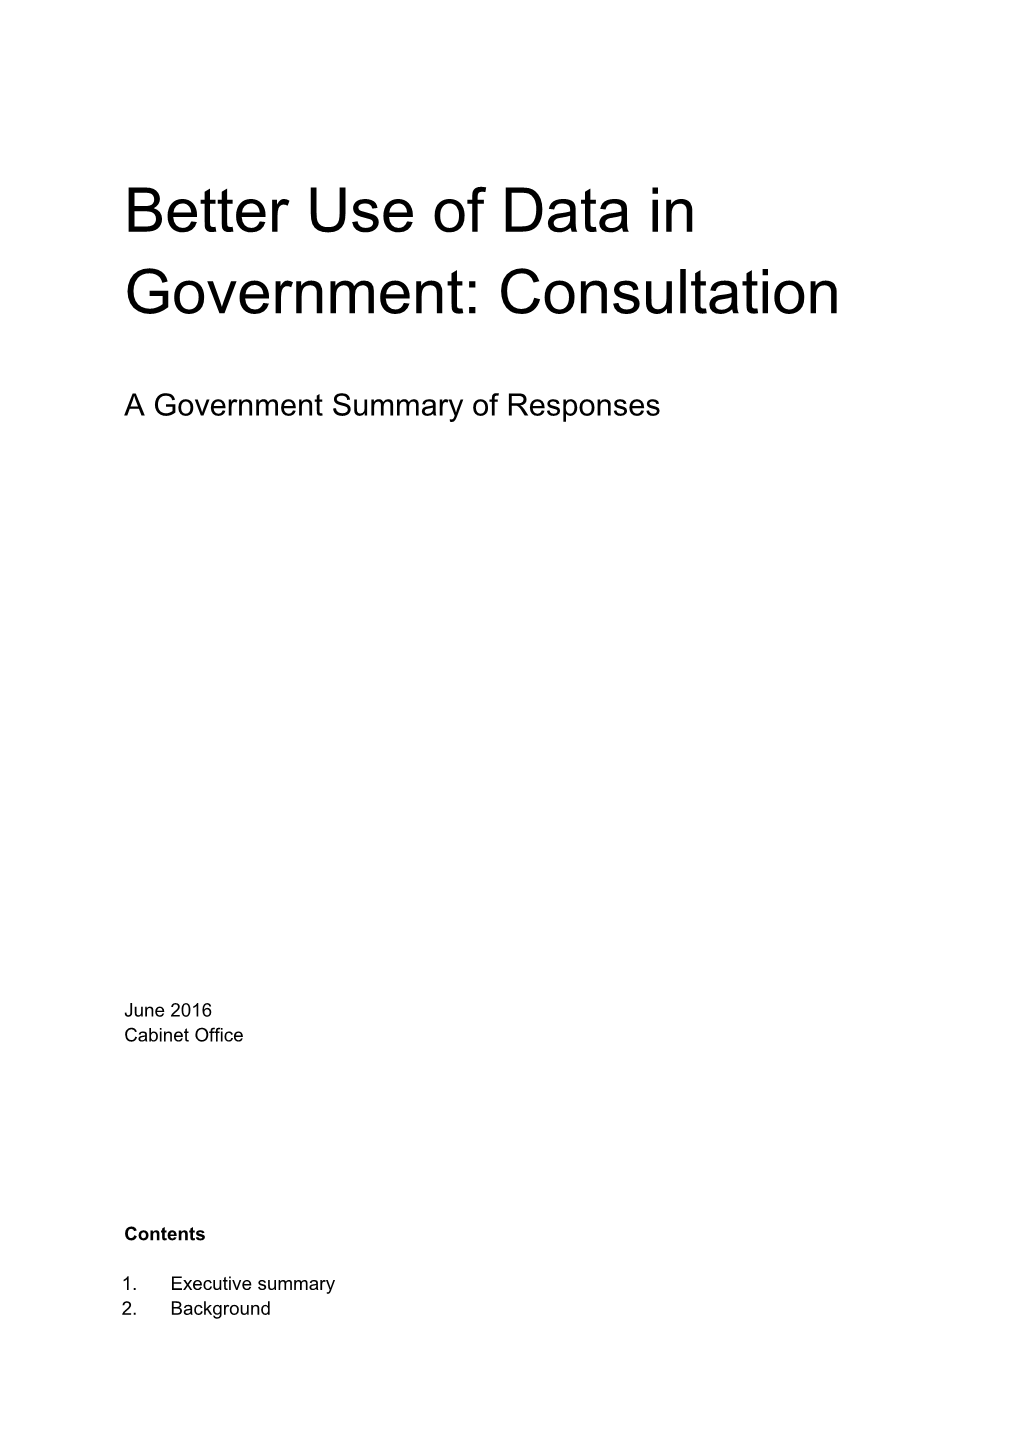 Better Use of Data in Government: Consultation